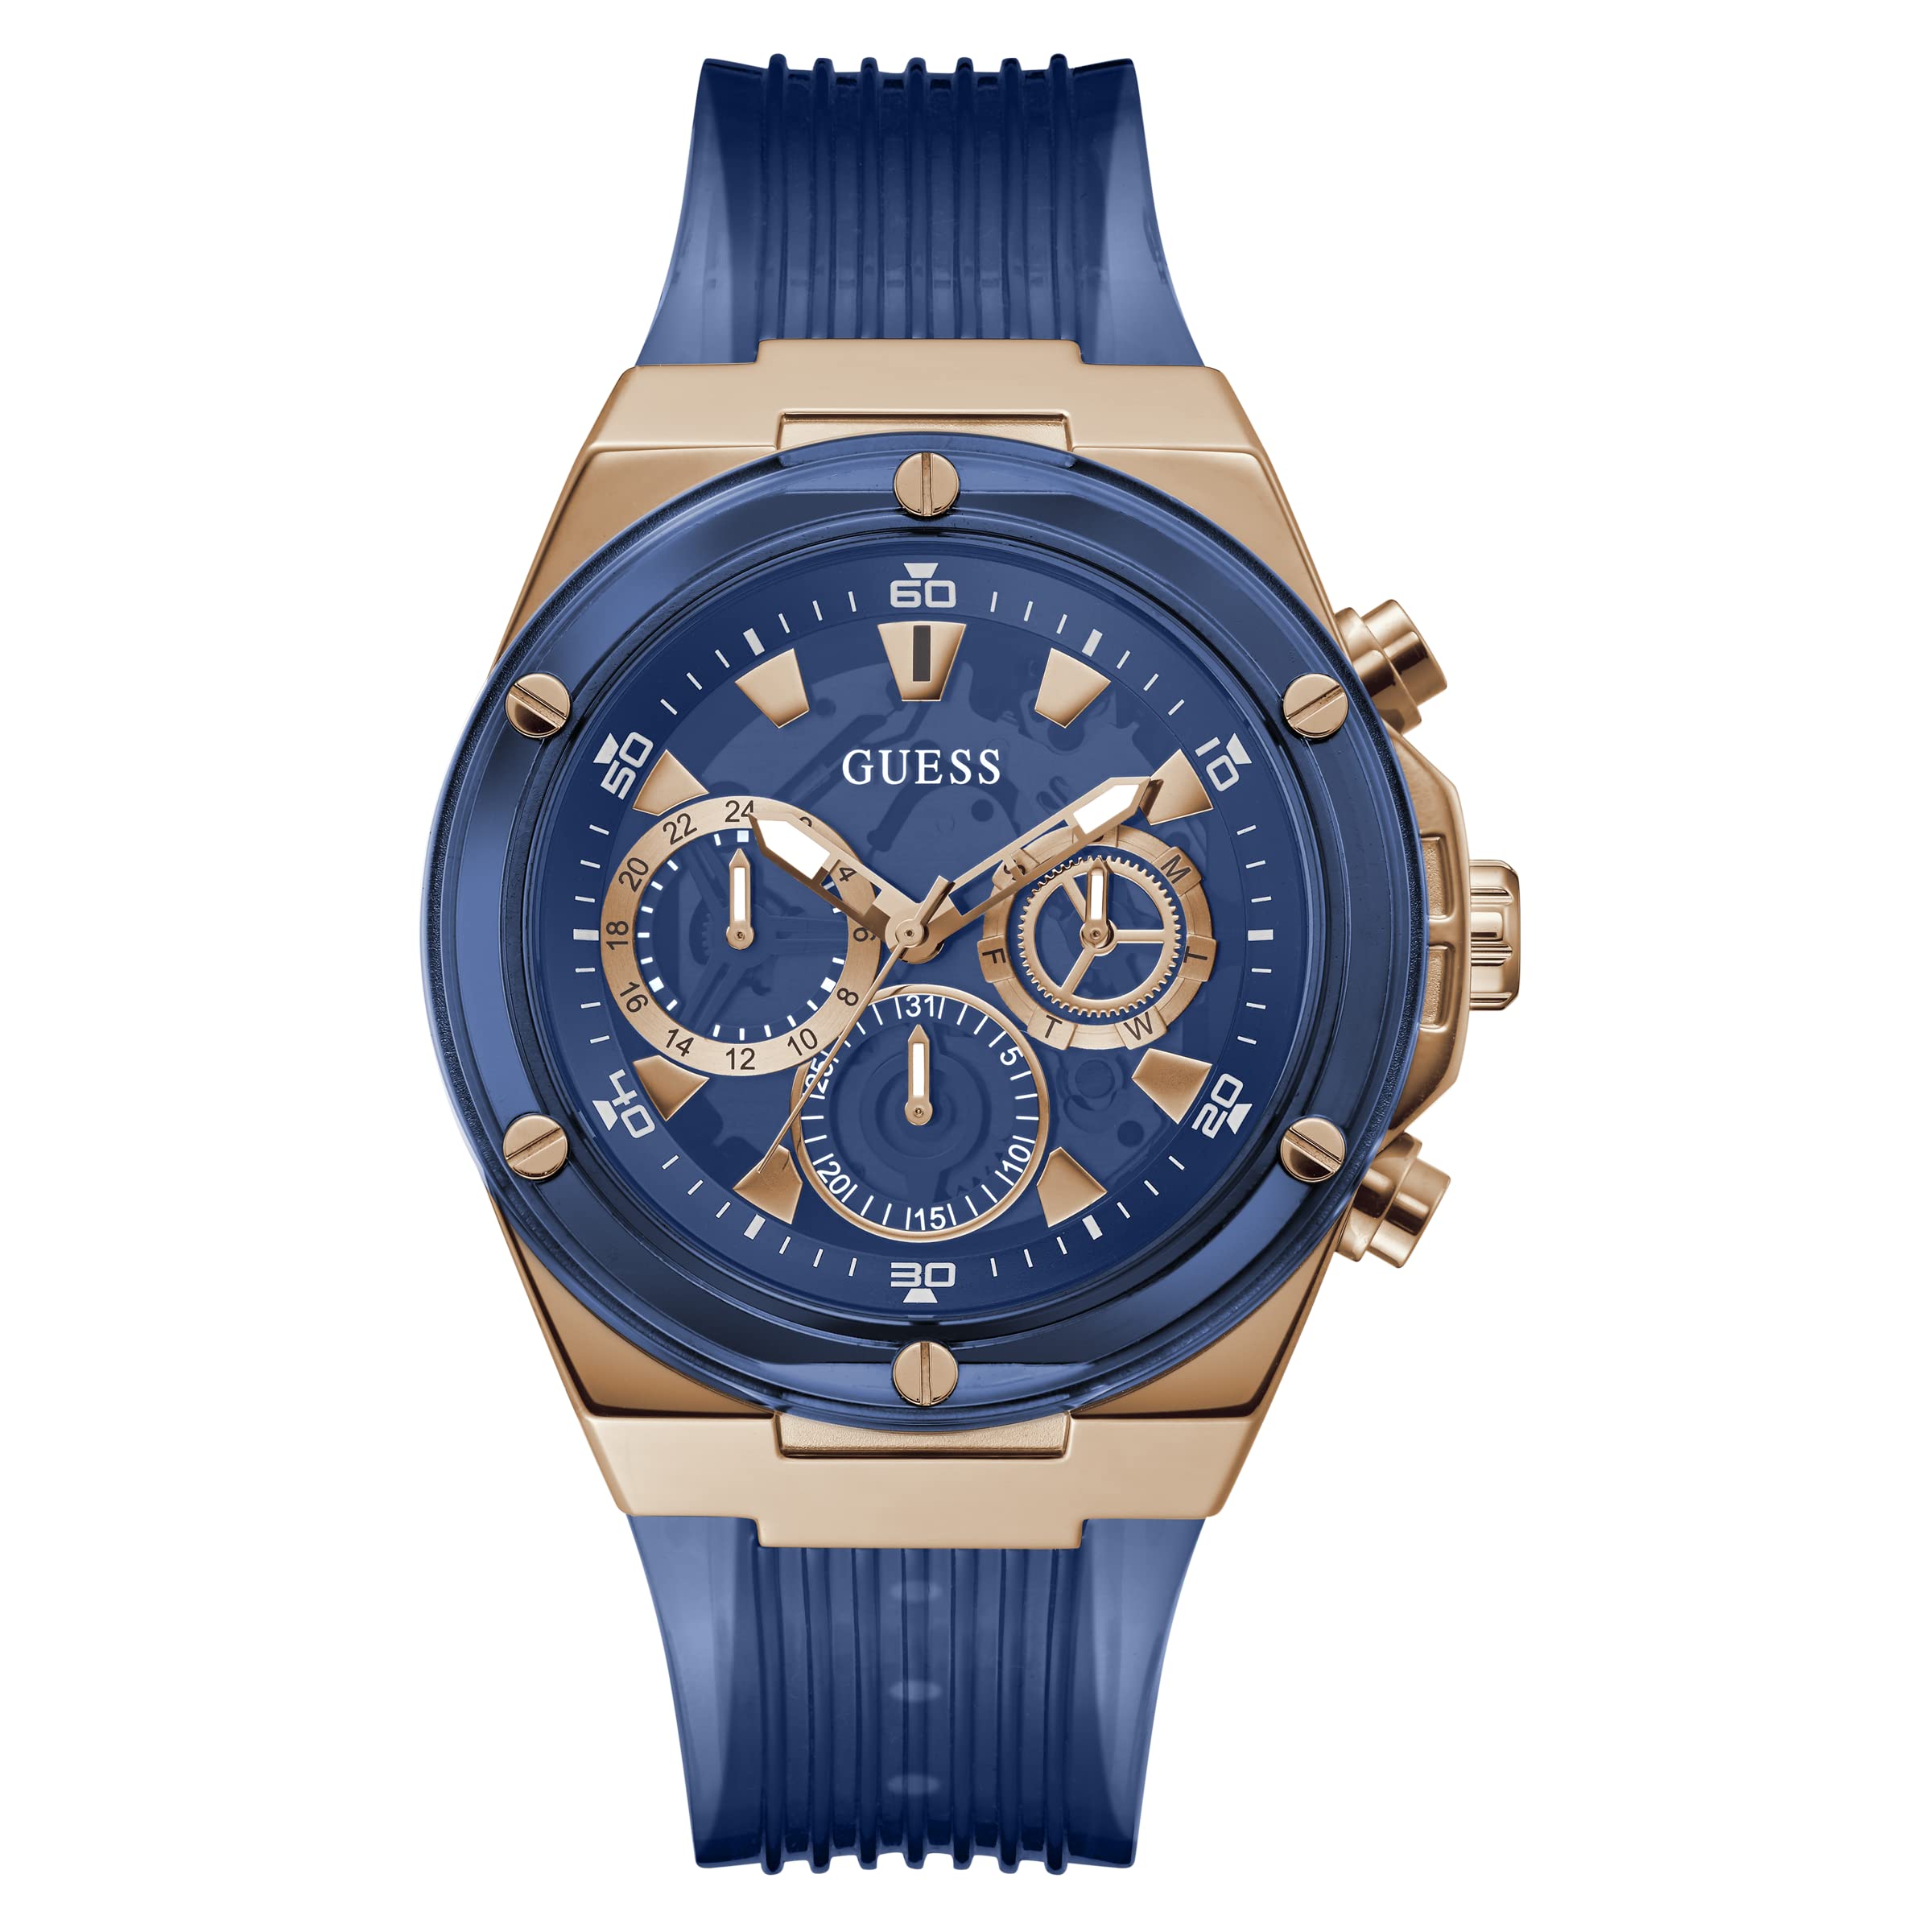 GUESS Multifunction 44mm Watch